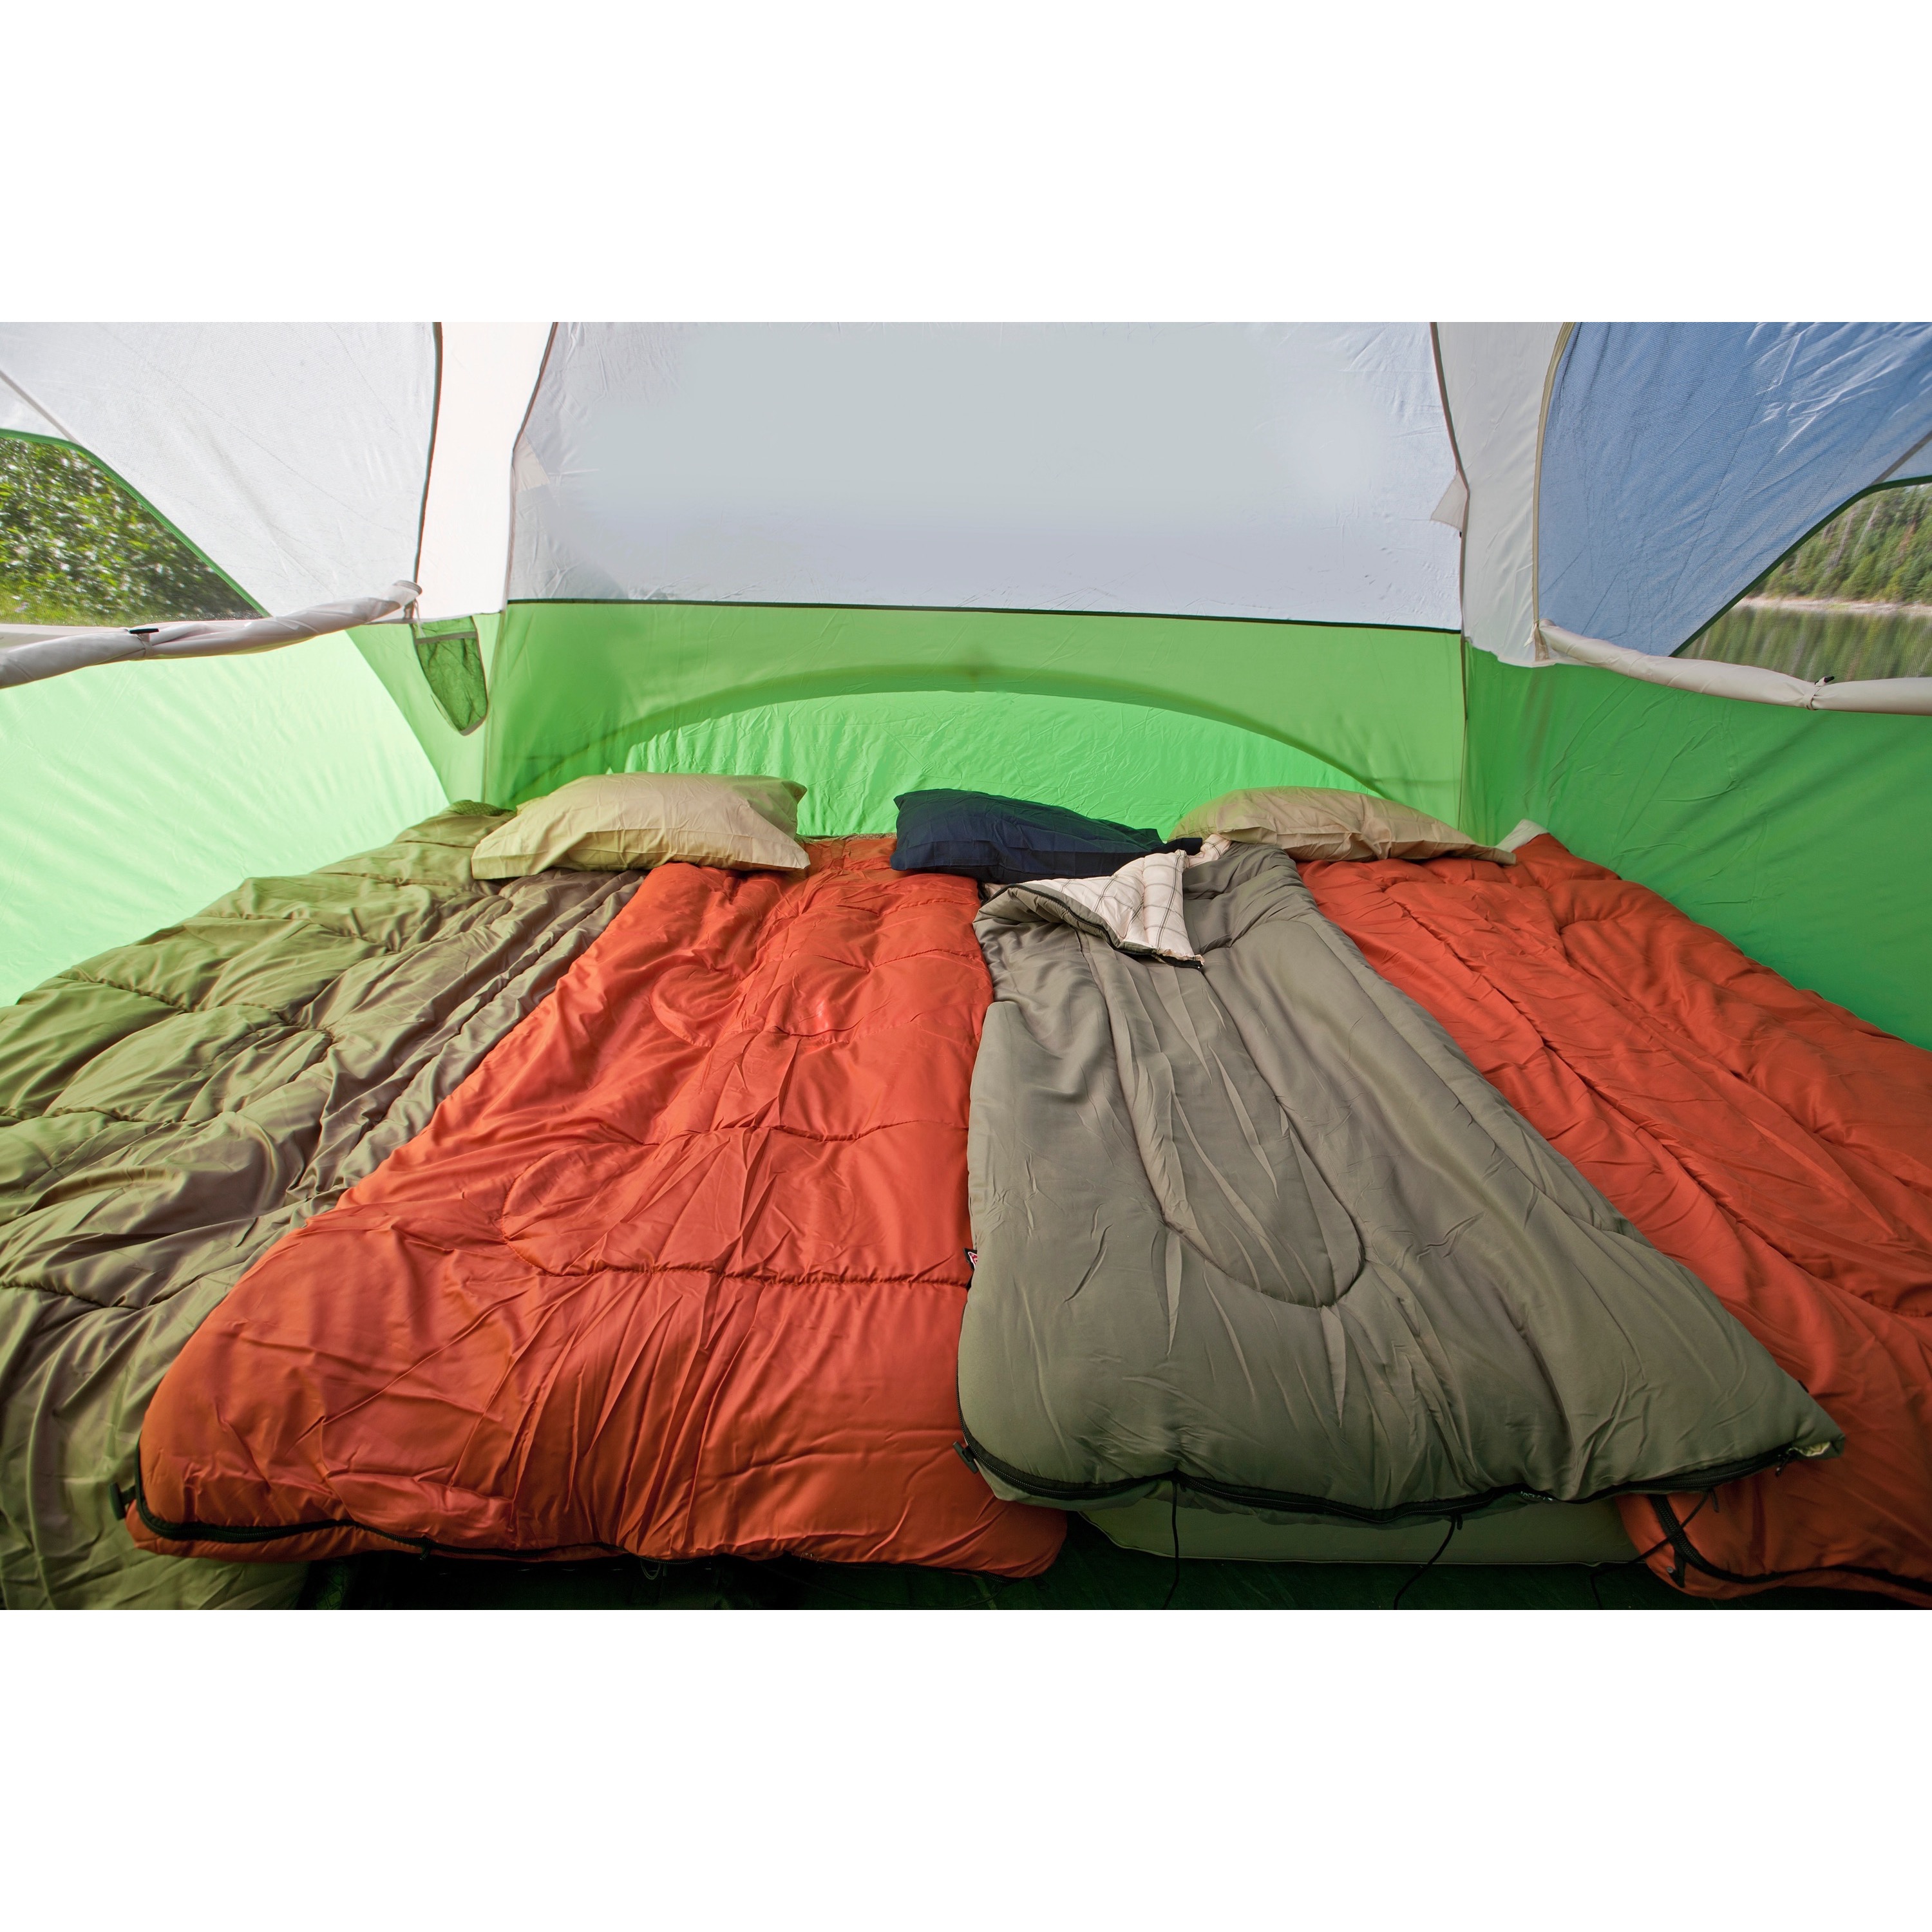 Coleman Evanston 6-Person Dome Tent with Screen Room, 2 Rooms, Green - image 4 of 9